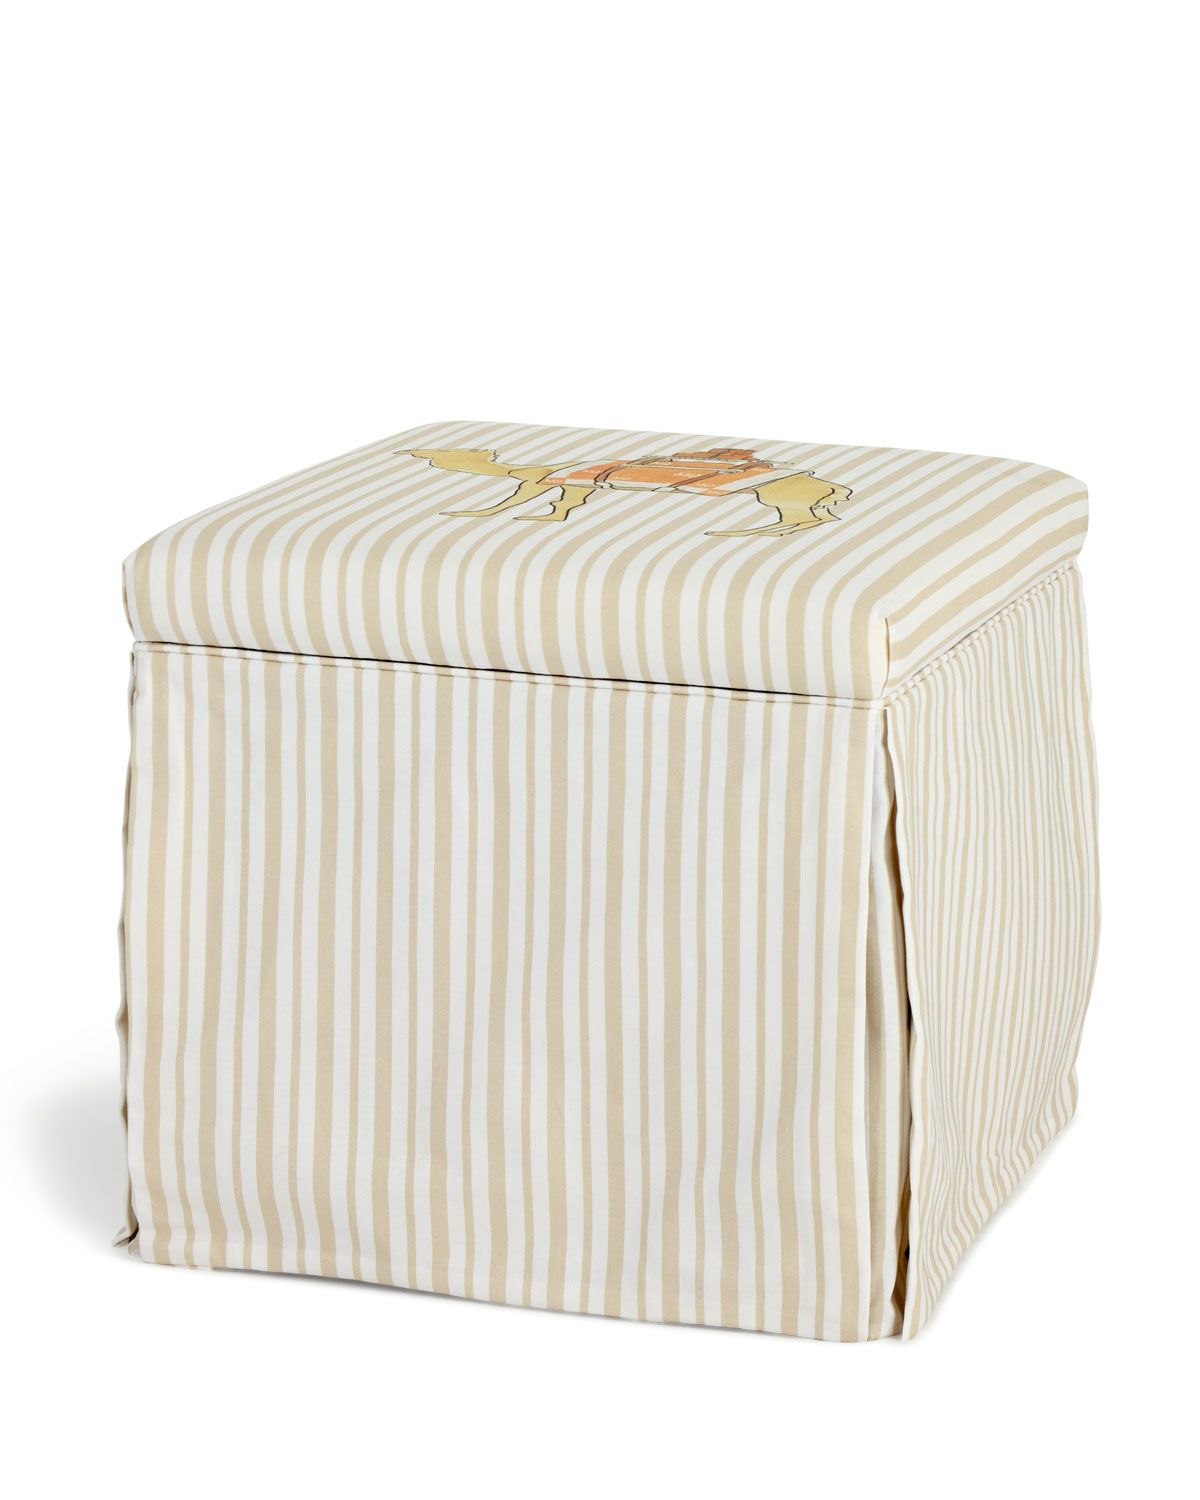 2019 Gray Stripes Cylinder Pouf Ottomans In Cloth & Company X Gray Malin Camel Stripe Skirted Storage Ottoman (View 1 of 10)